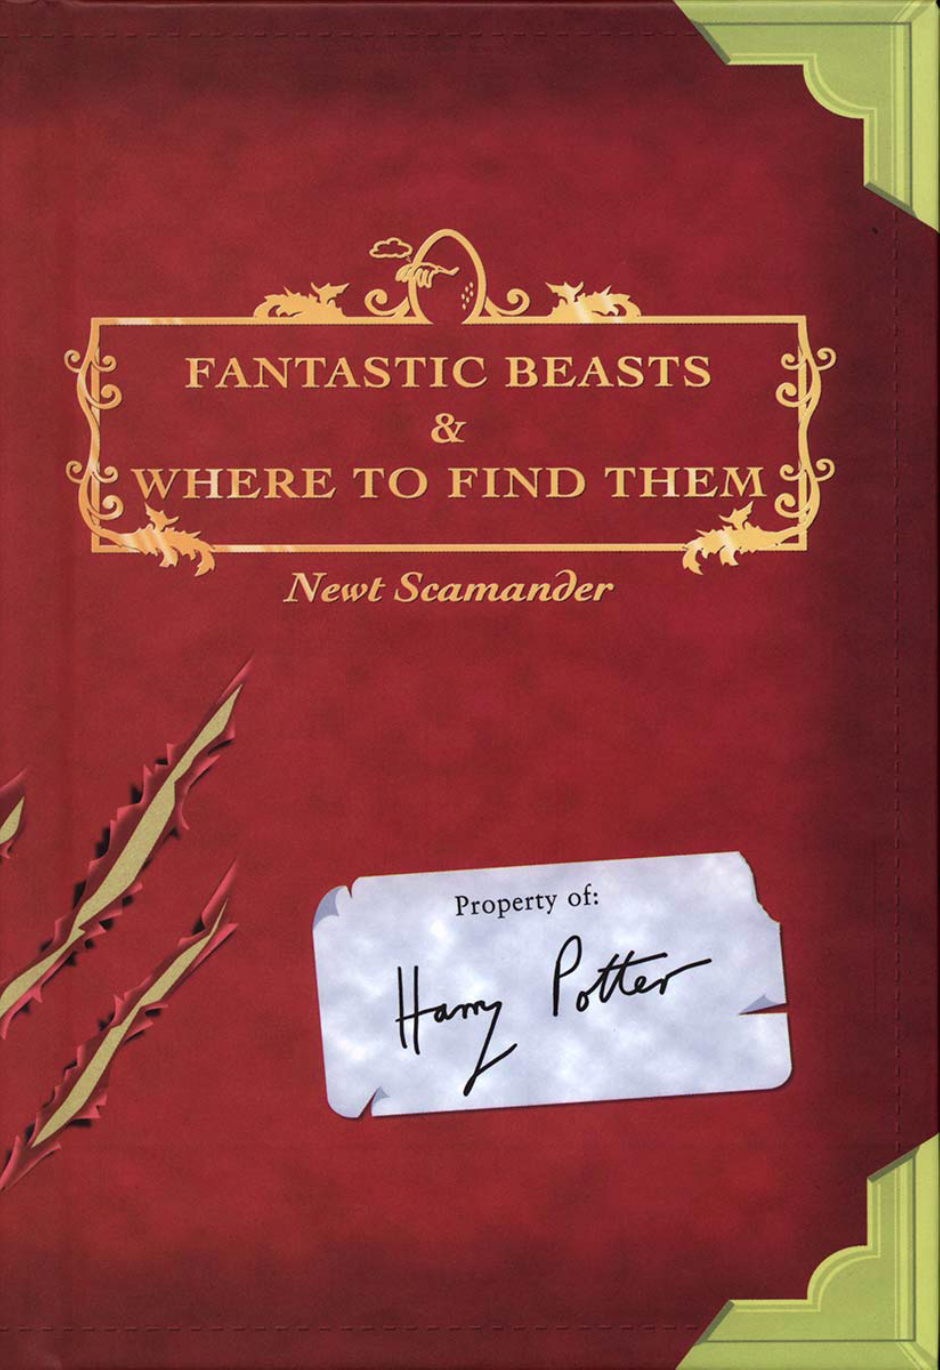 Film Online Fantastic Beasts And Where To Find Them Watch Bluray